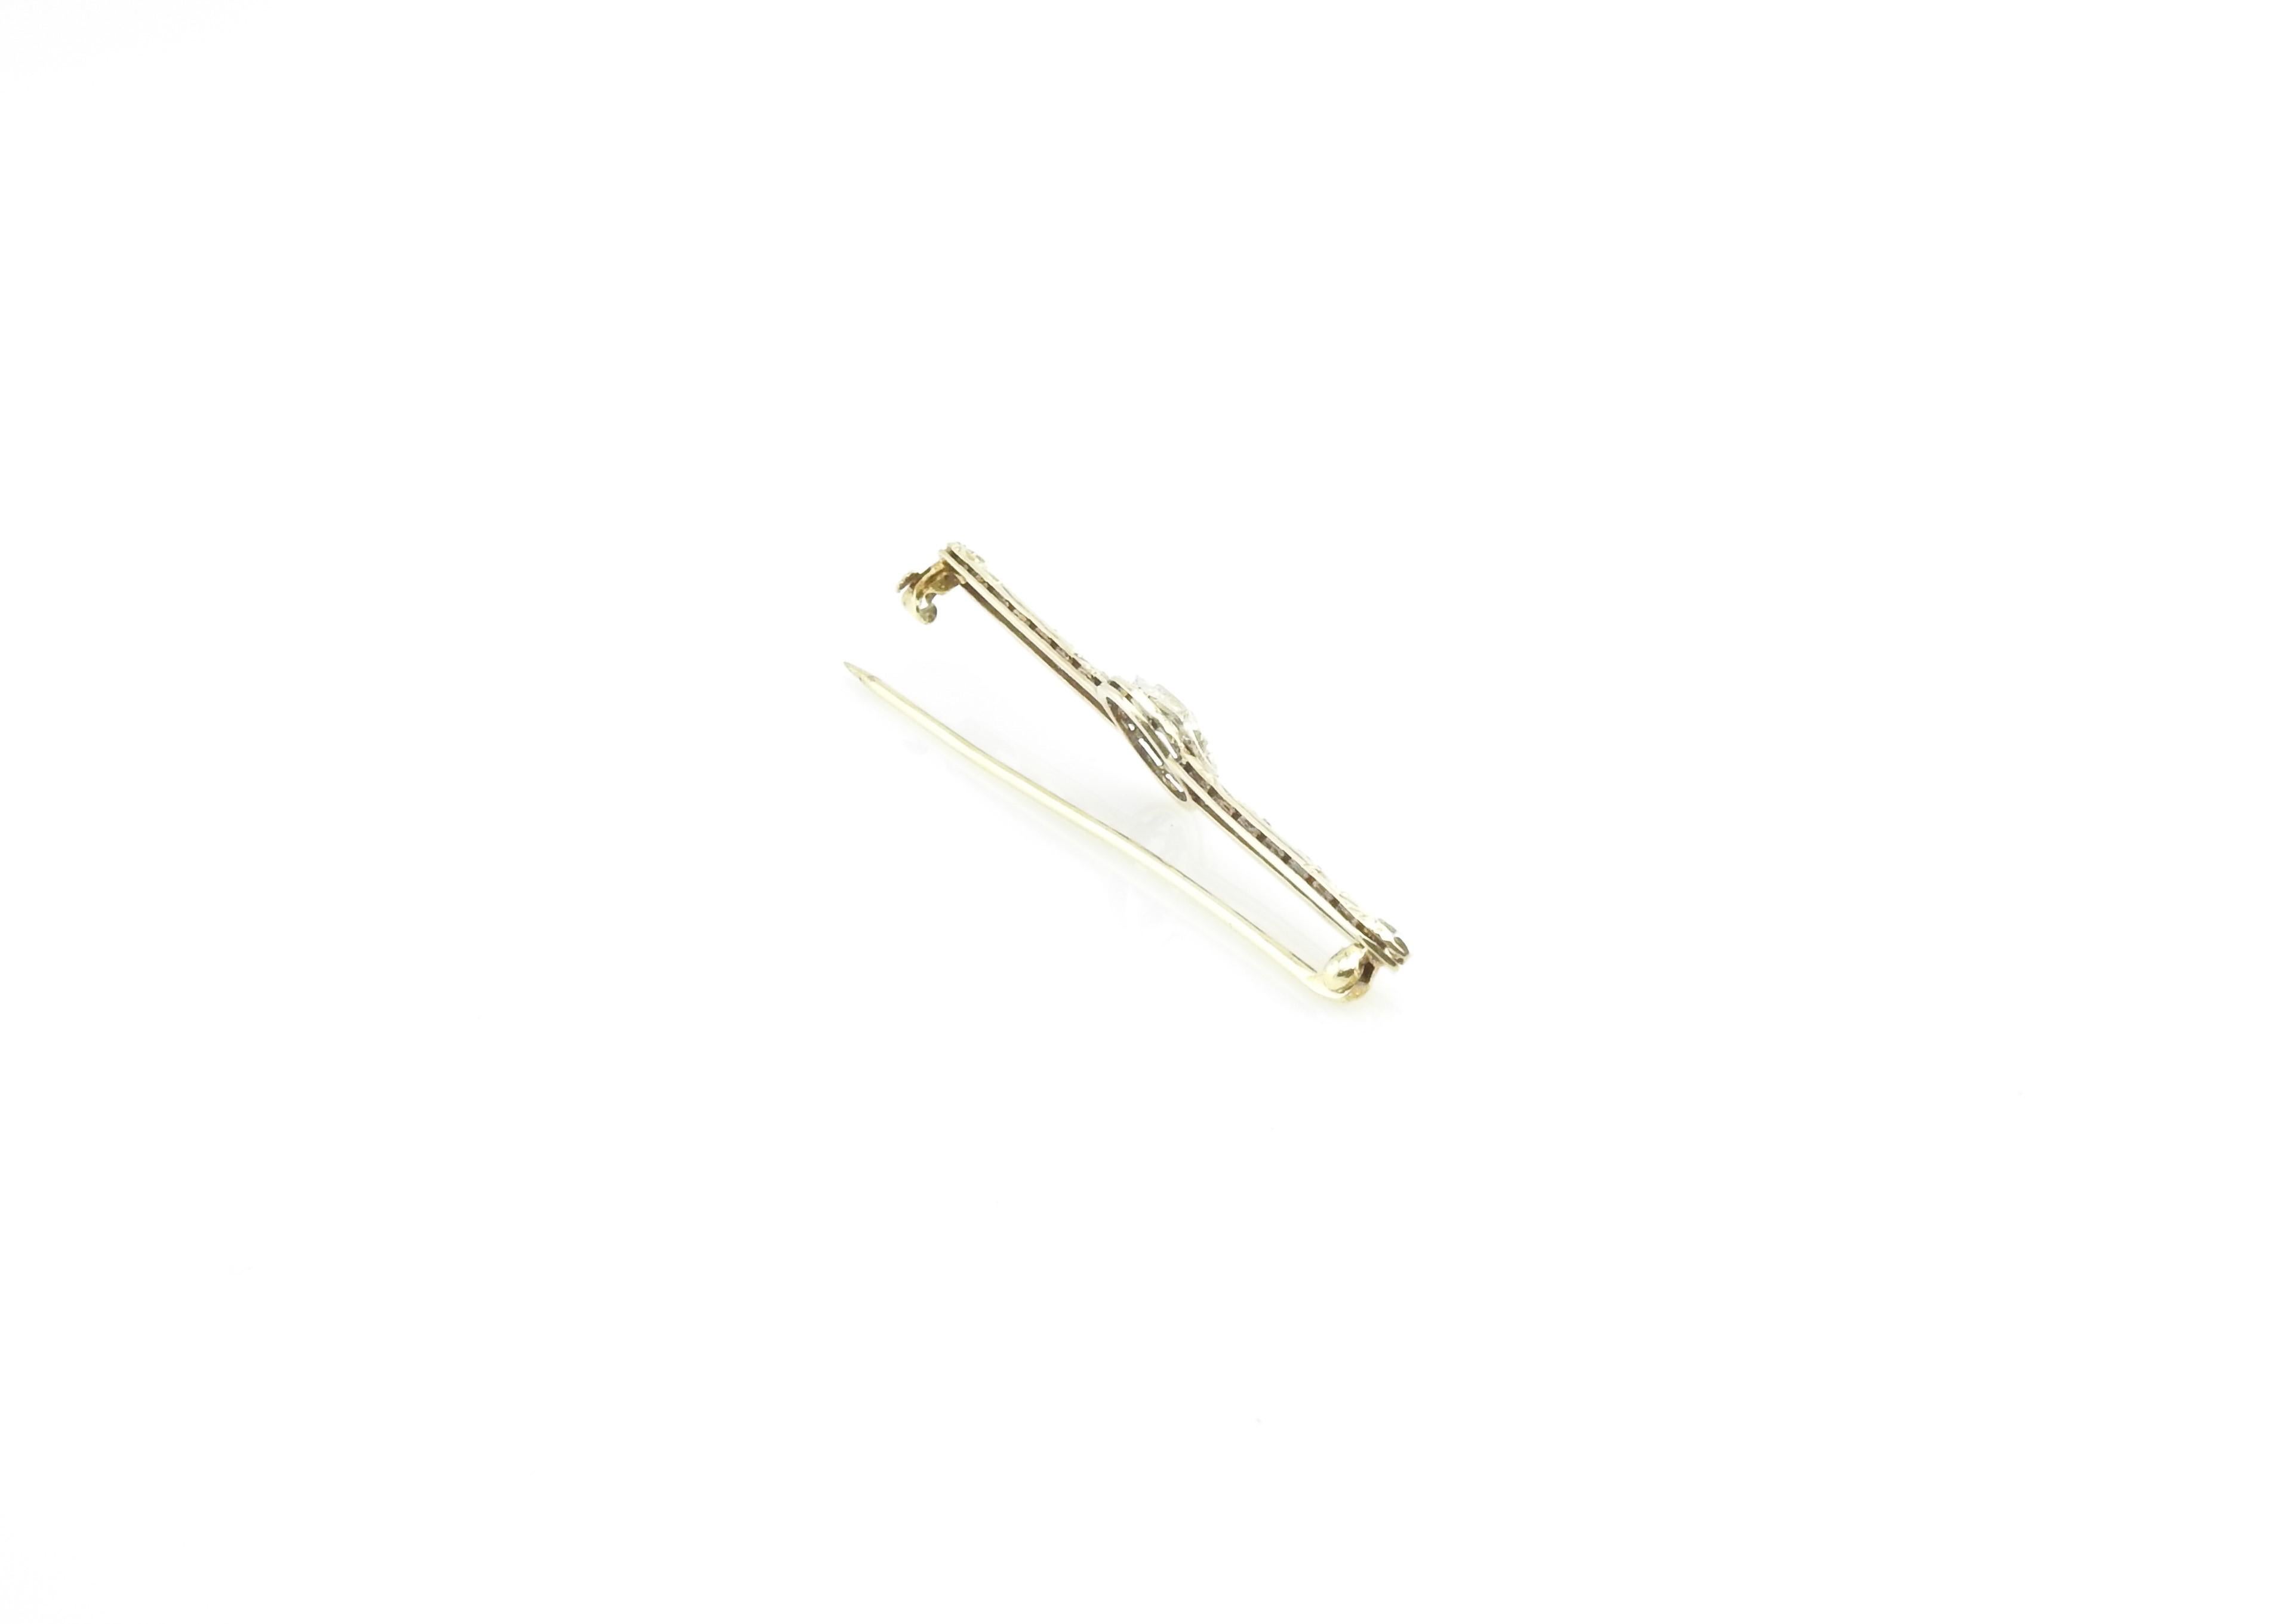 Vintage 14 Kart Yellow Gold Filigree and Diamond Bar Pin / Brooch

This lovely bar pin features one old mine cut diamond set in beautifully detailed 14K yellow gold filigree.

Approximate total diamond weight: .05 ct.

Diamond color: H

Diamond